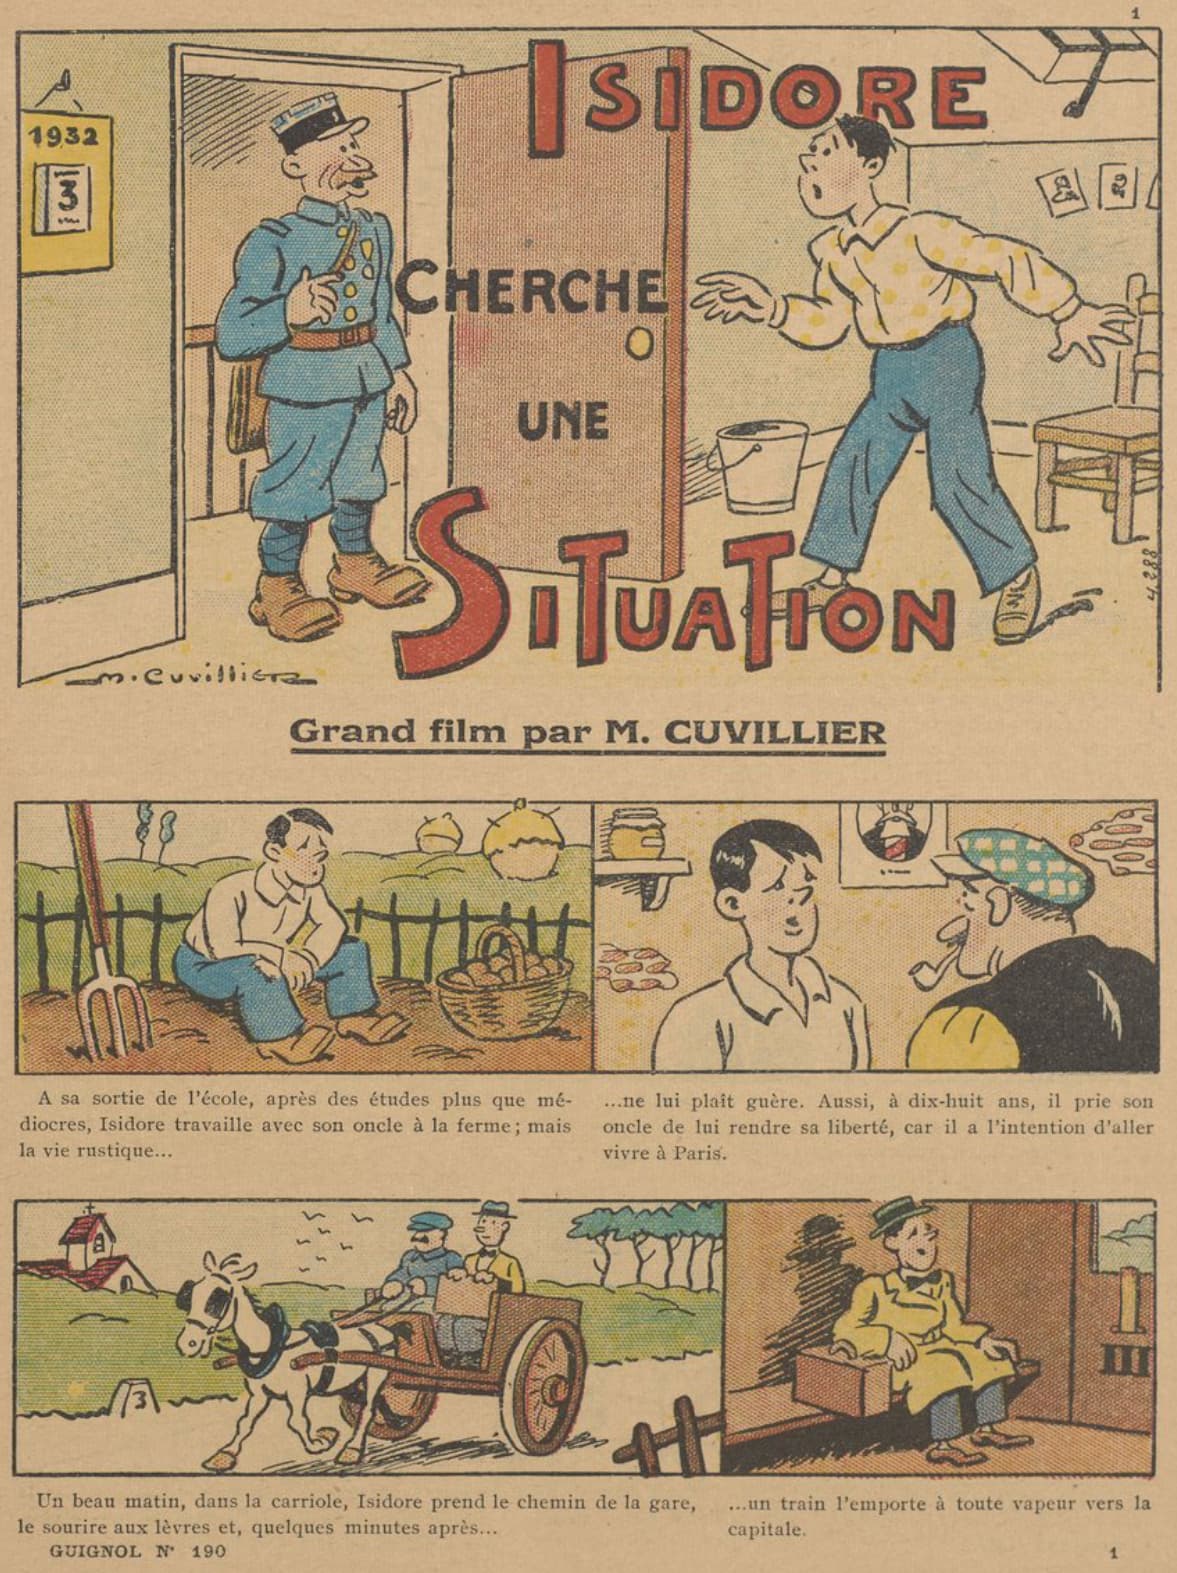 Guignol 1932 - n°190 - Isidore cherche une situation - 3 avril 1932 - page 1